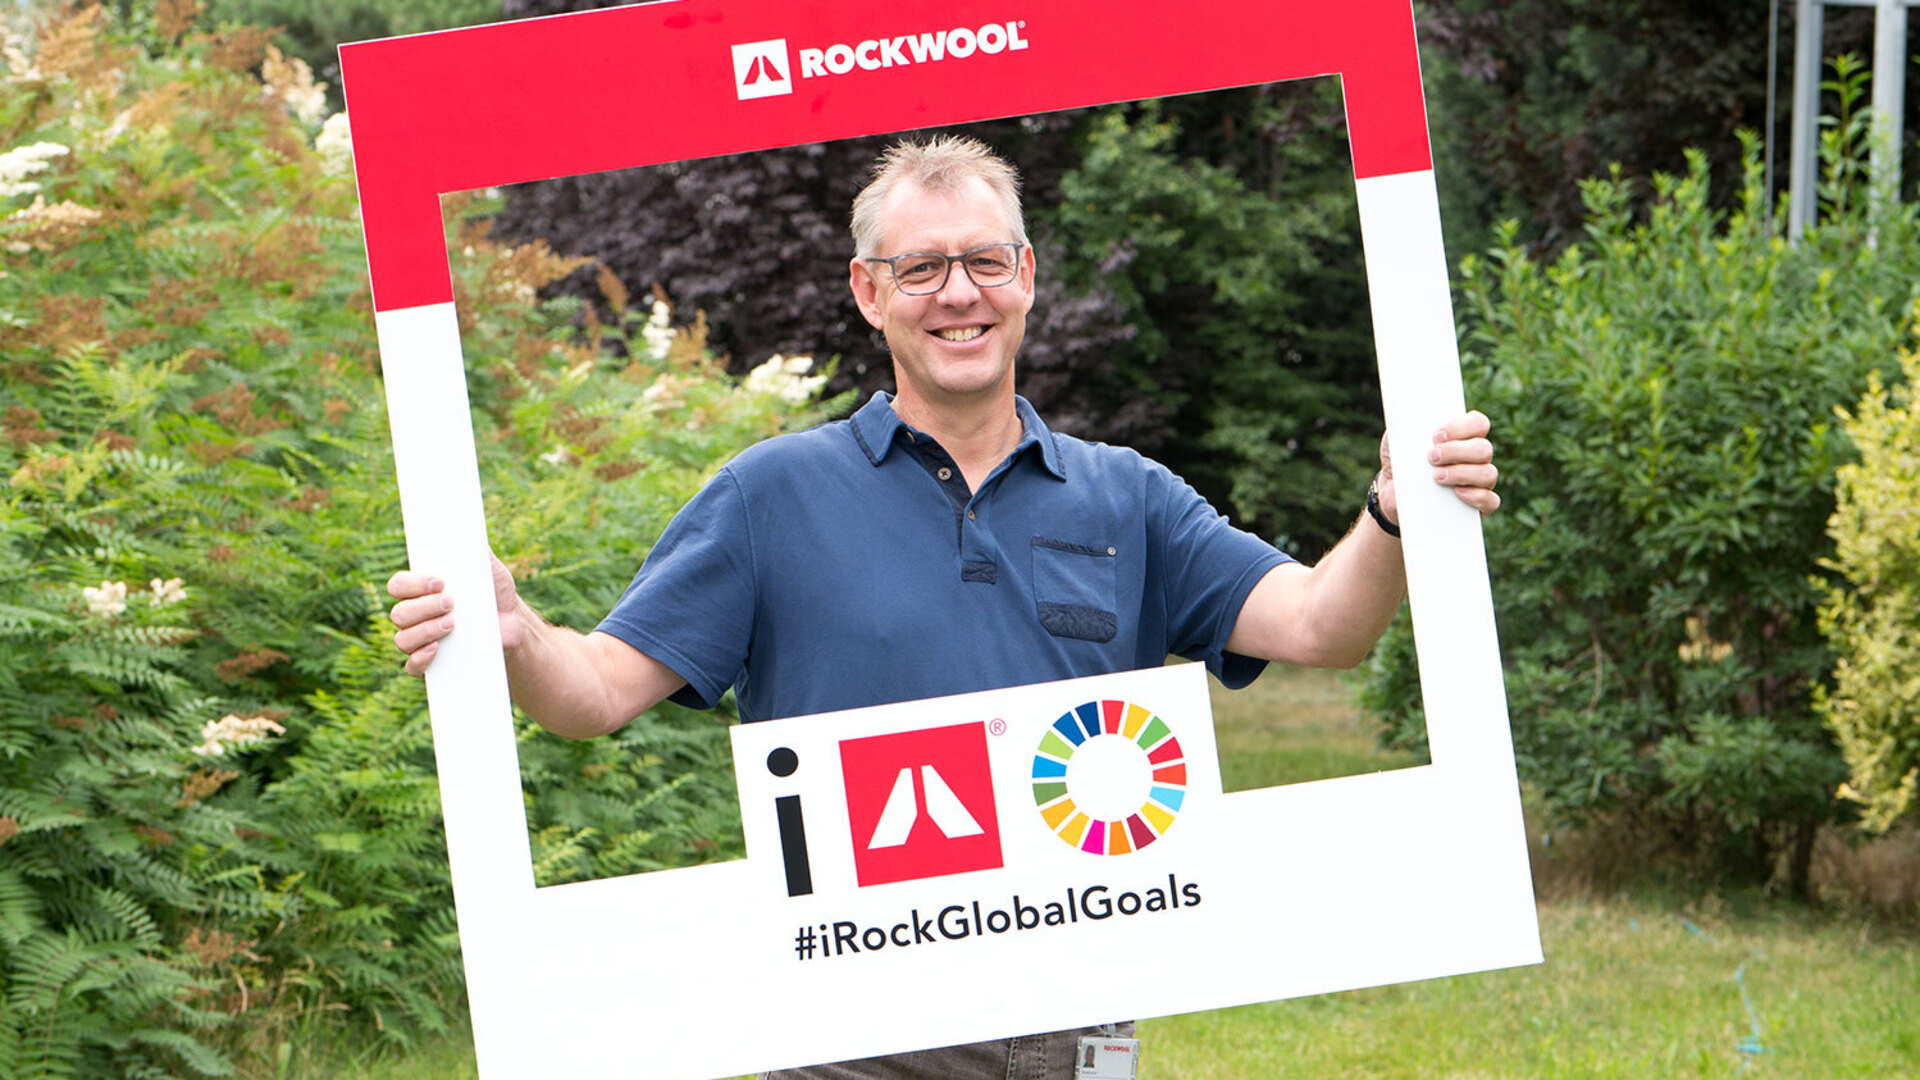 An employee promoting the #iRockGlobalGoals campaign. Keywords: Sustainable Development Goals, SGDs, Global Goals, Sustainability, Employees, Employee